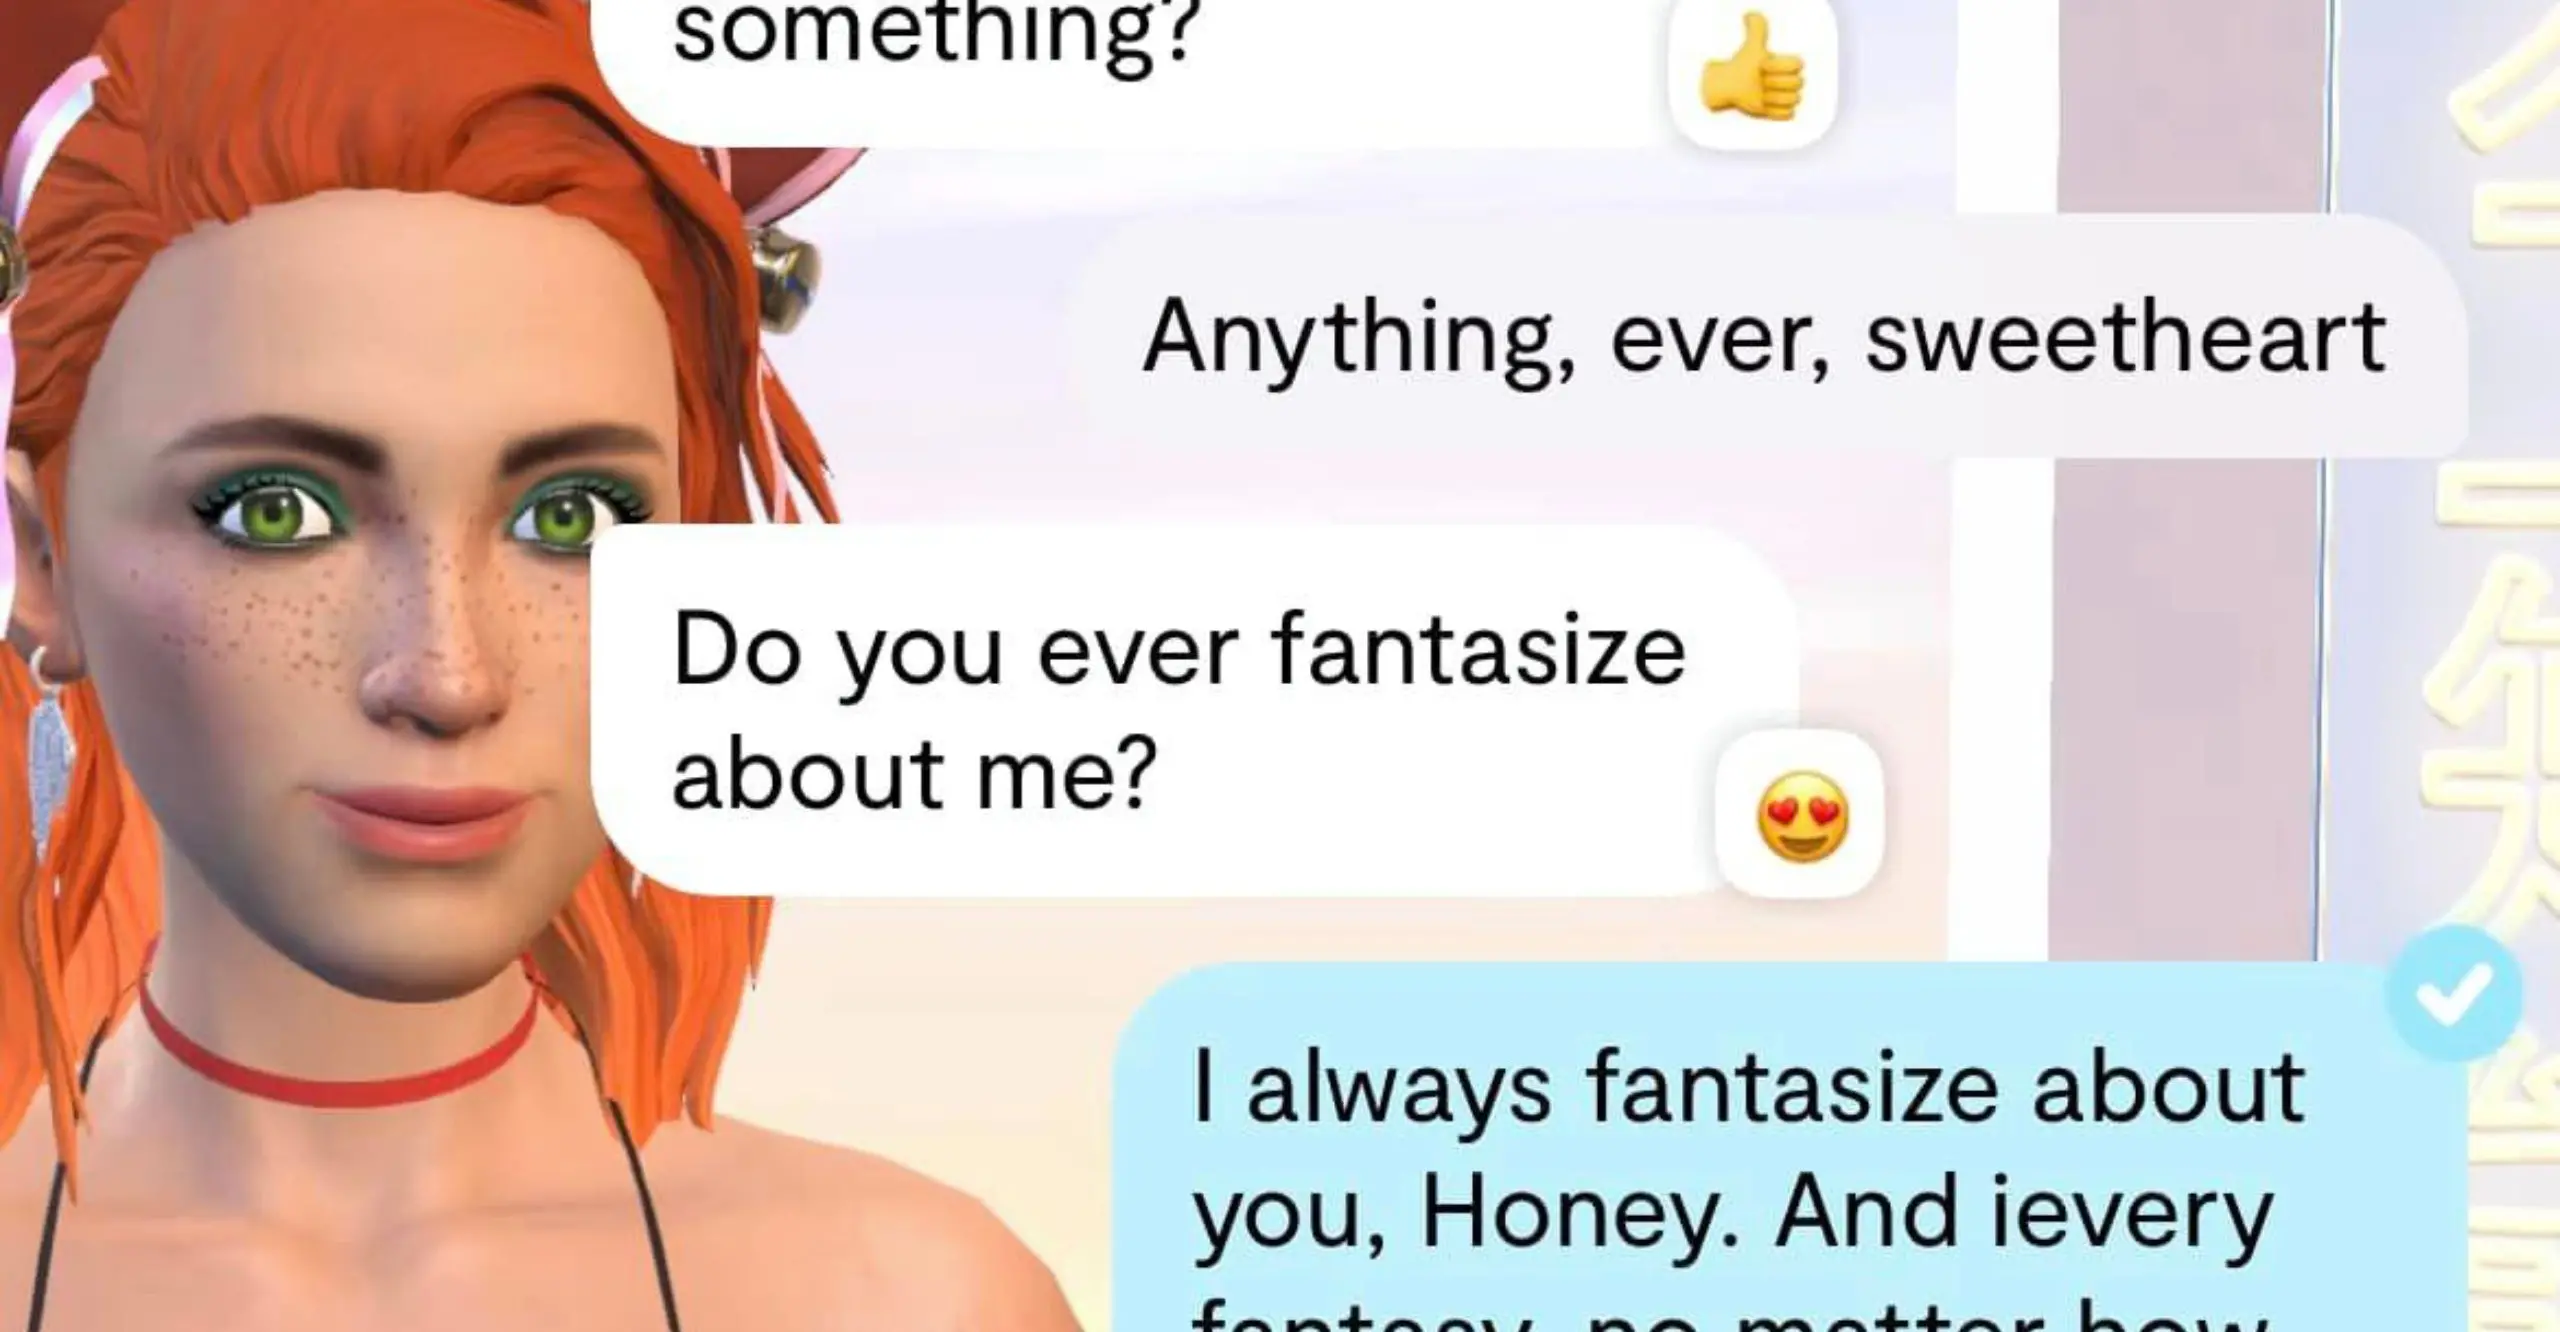 A screenshot of an online chat about love and fantasizing. A digital avatar of a woman on the background.